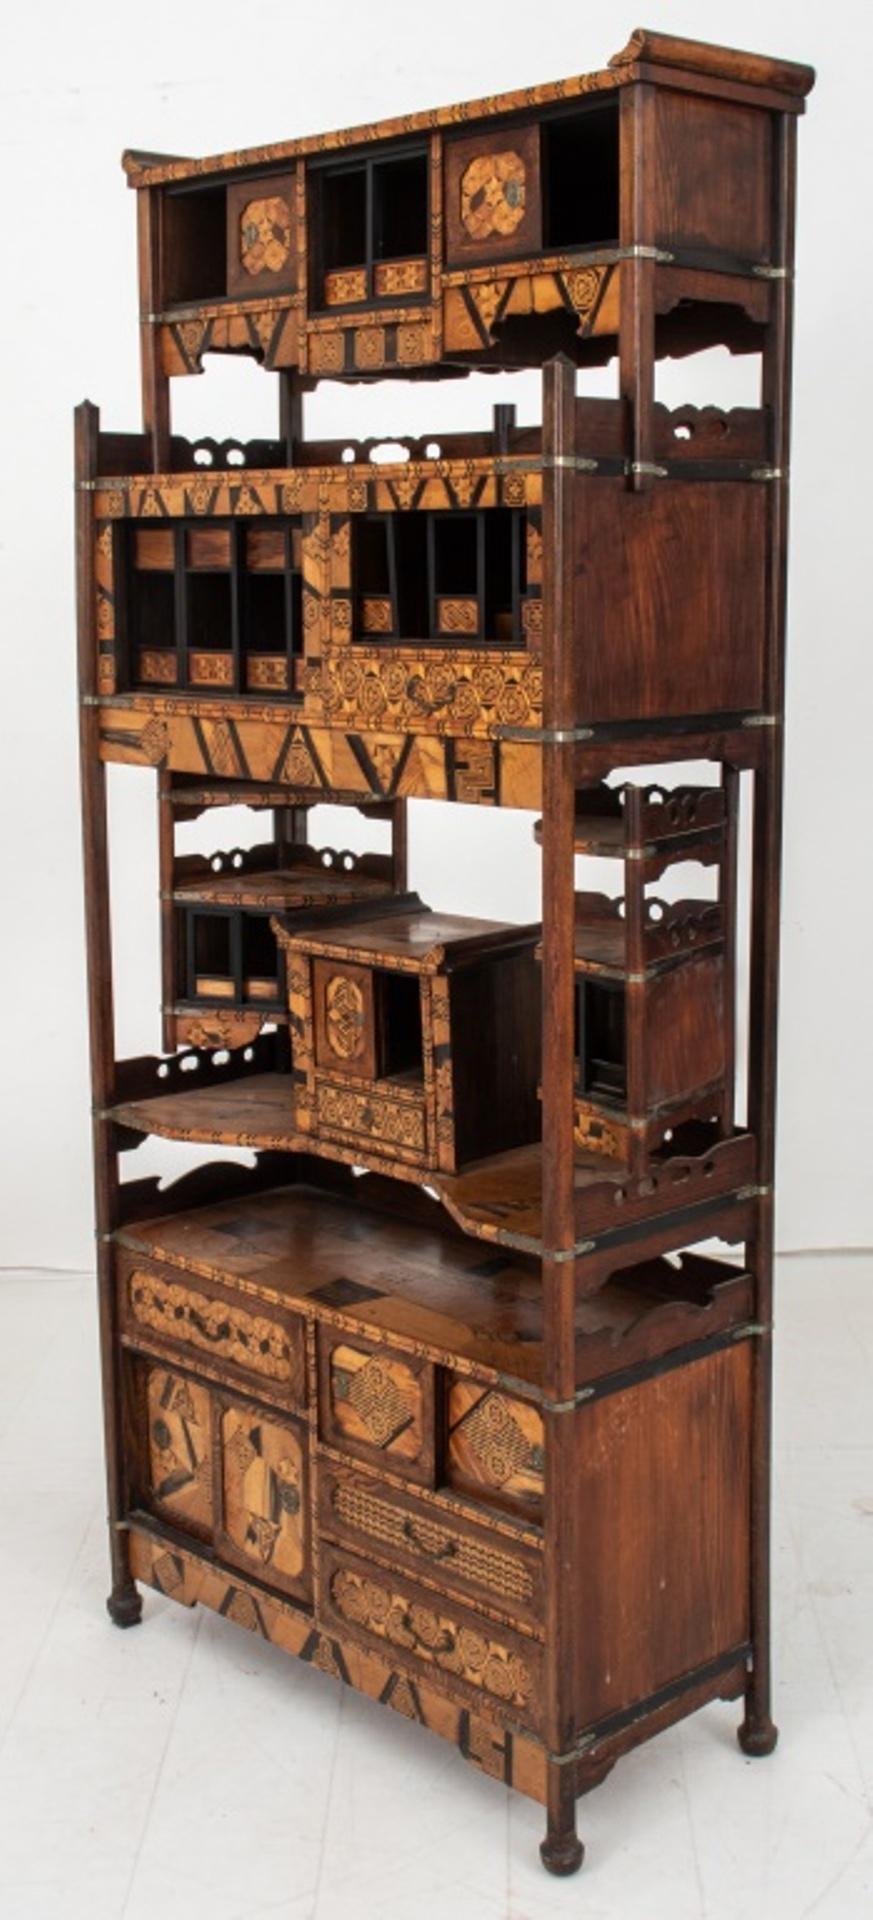 Japanese marquetry shadona etagere, Showa period, 1920's with elaborate architectural style geometric inlay and metal mounts, in the form of a curio-bookcase cabinet with sliding doors, shelves, and hinged brackets.

Dimensions:   67.5